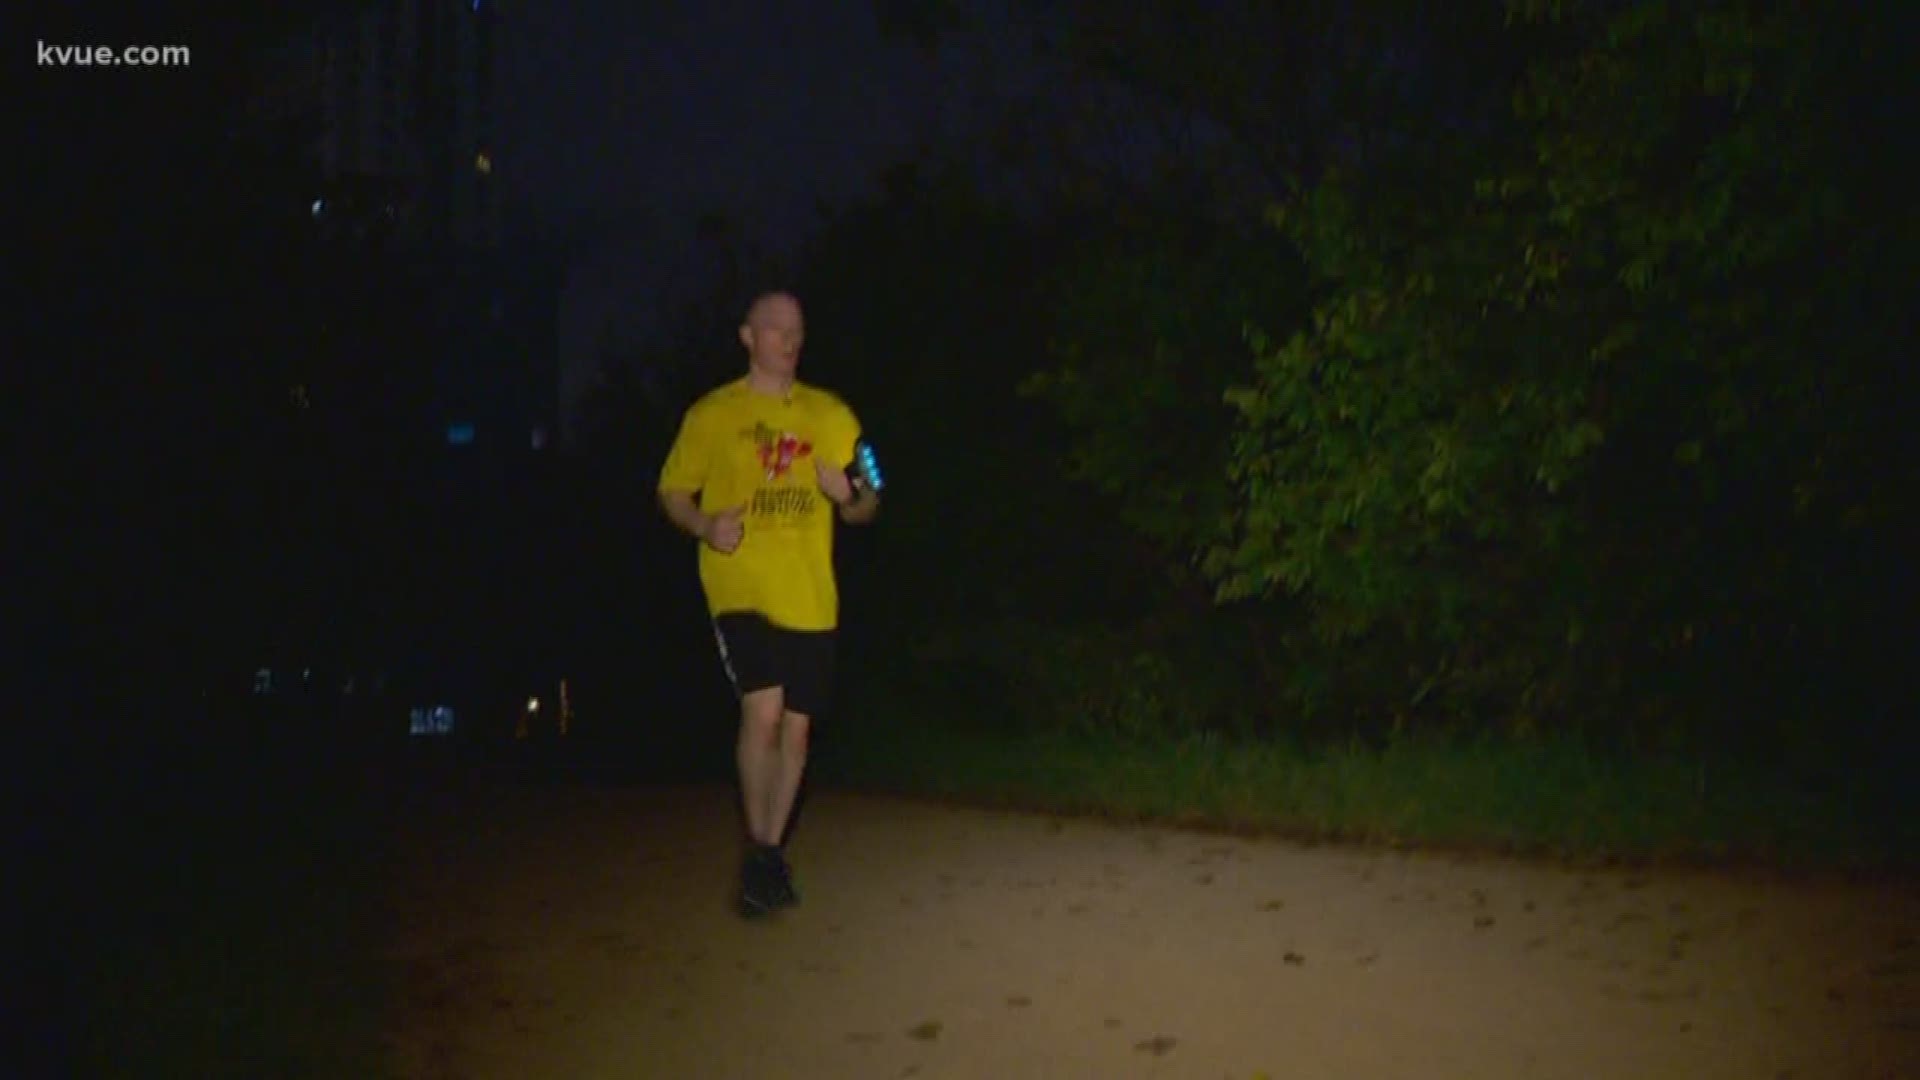 An armed good Samaritan shares a story about the night he helped save a woman during a sexual assault on an Austin trail, and how he almost didn't bring his gun that night.